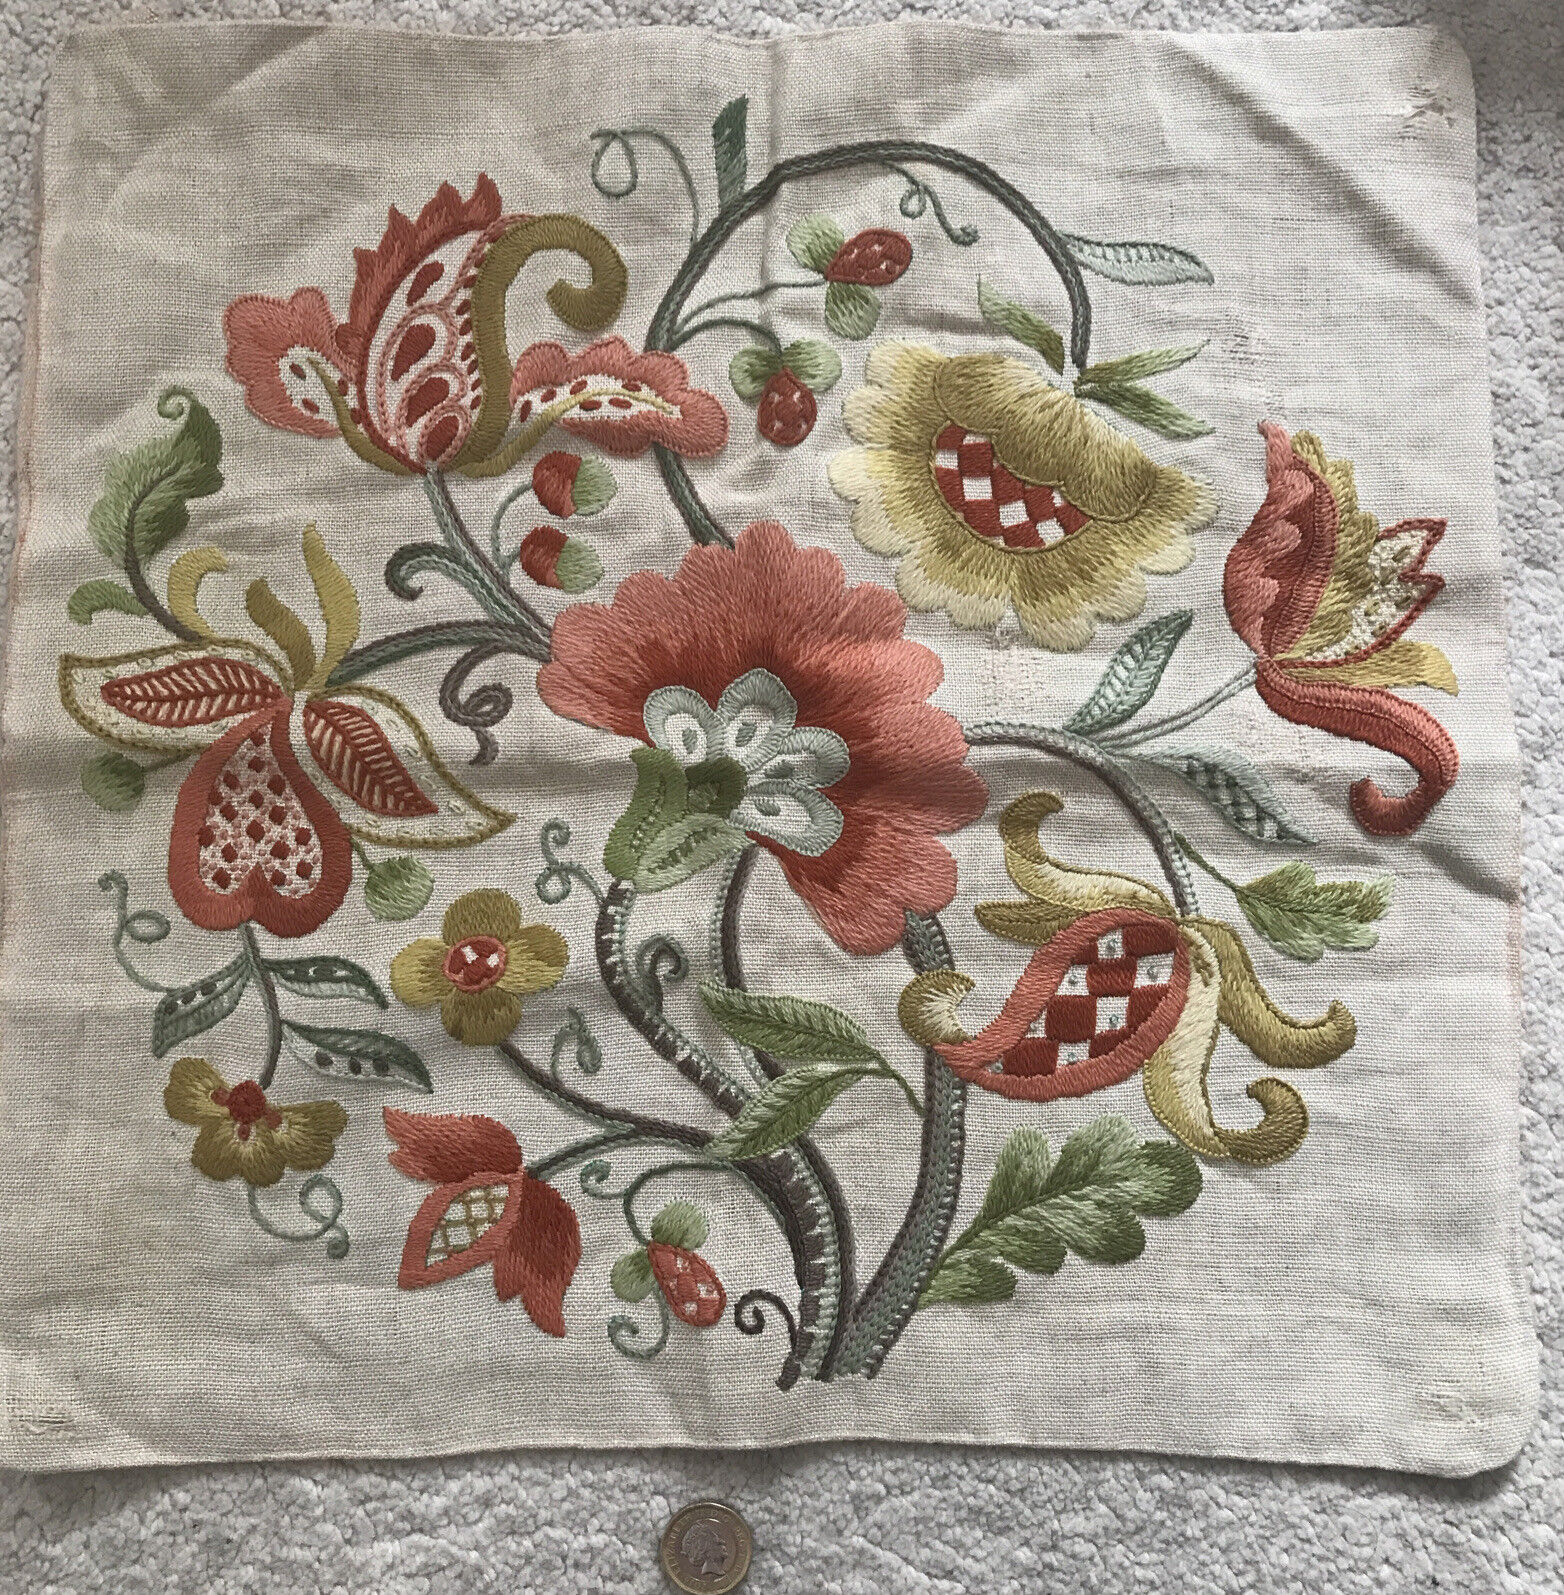 Antique Valuations: Antique hand embroidered botanical flower patterned cushion frontal